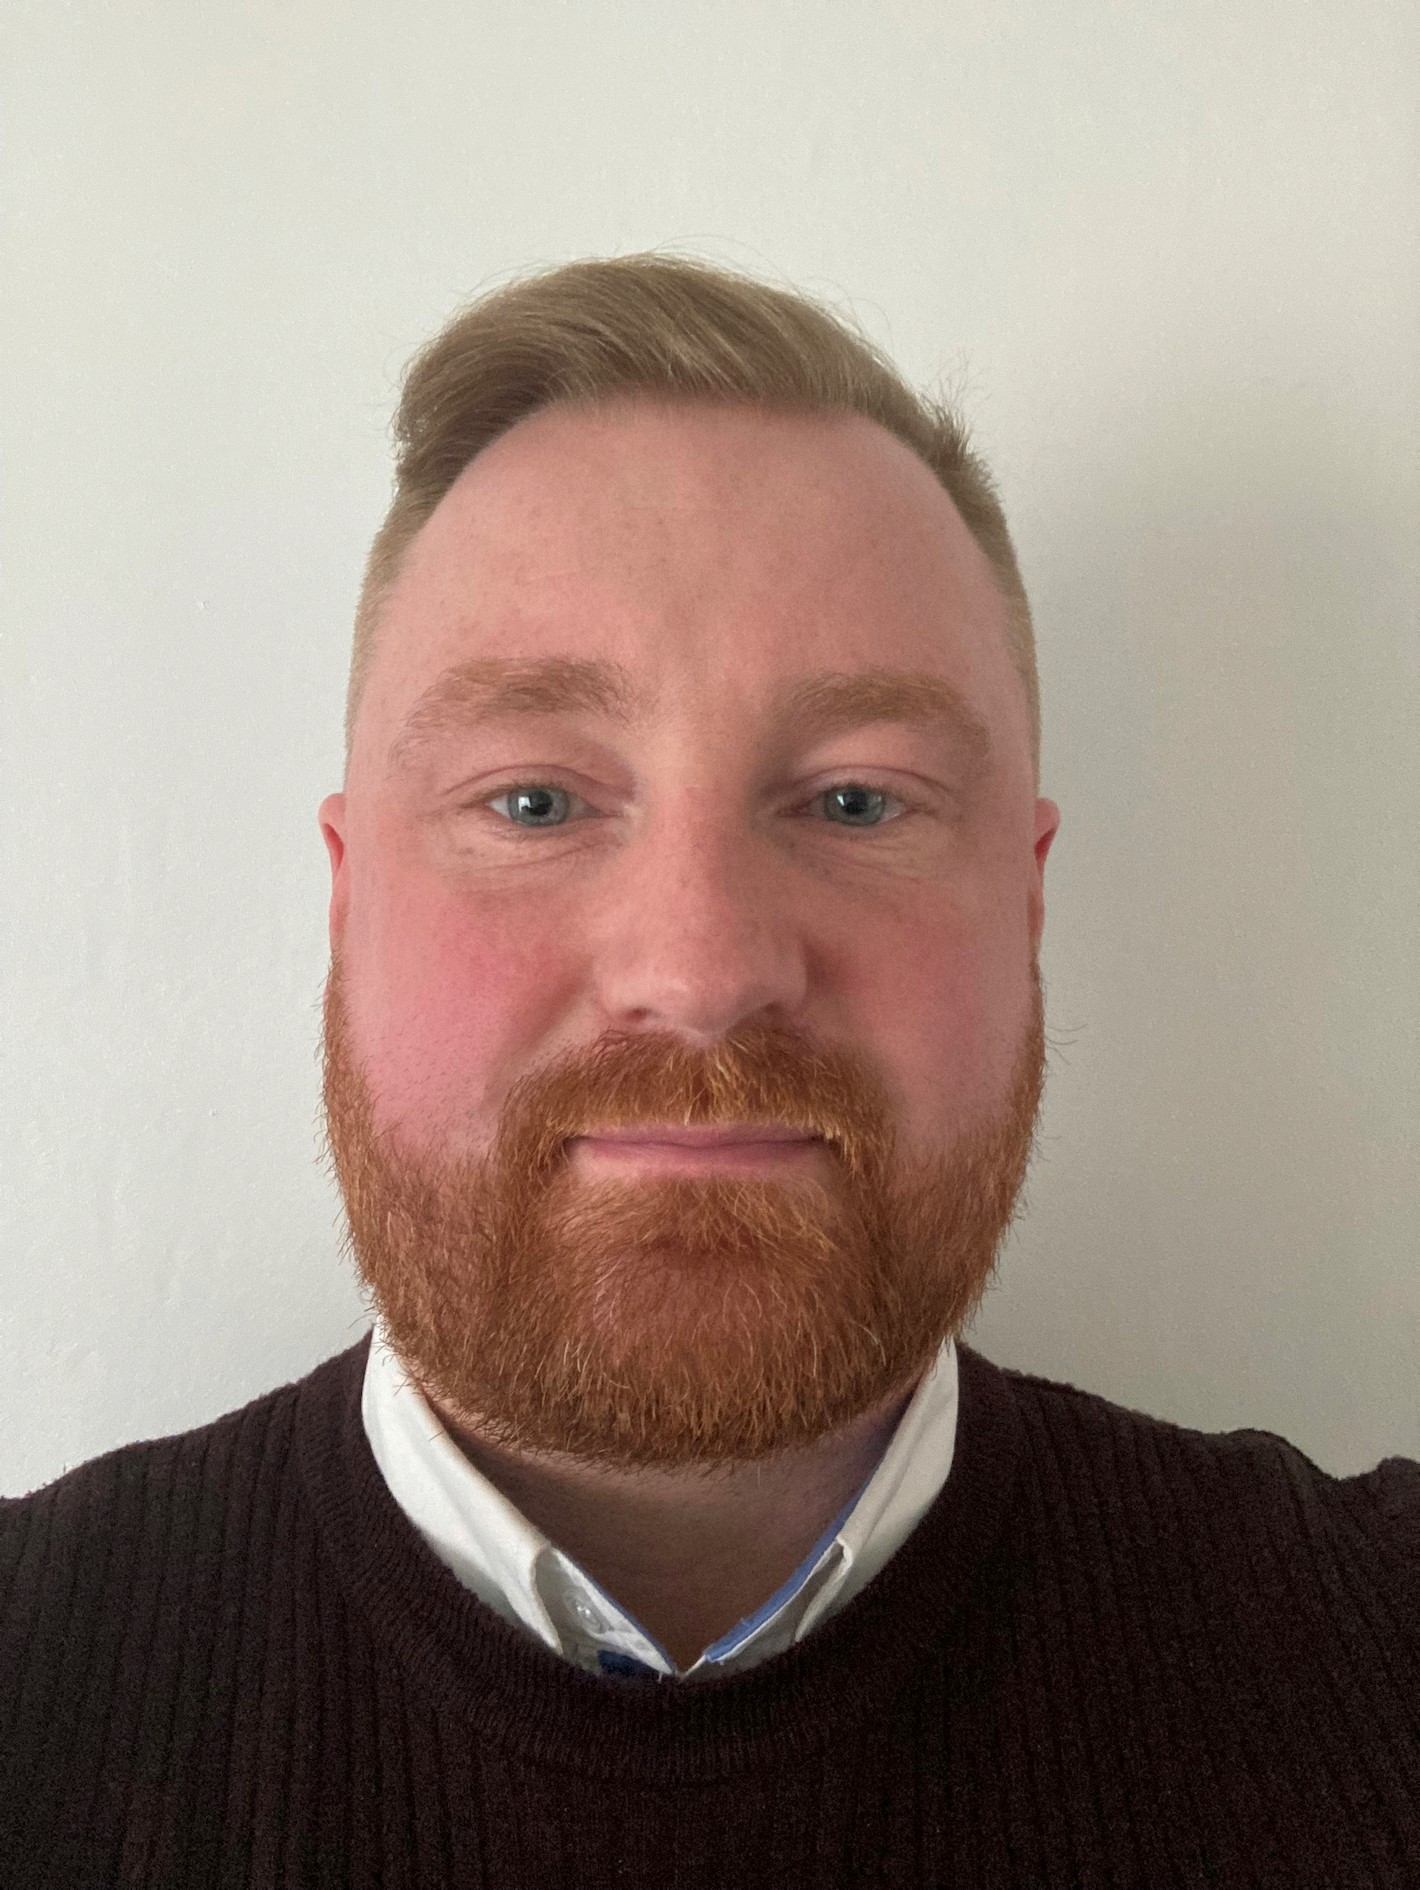 Ring announces new area sales manager for Scotland and Northern Ireland